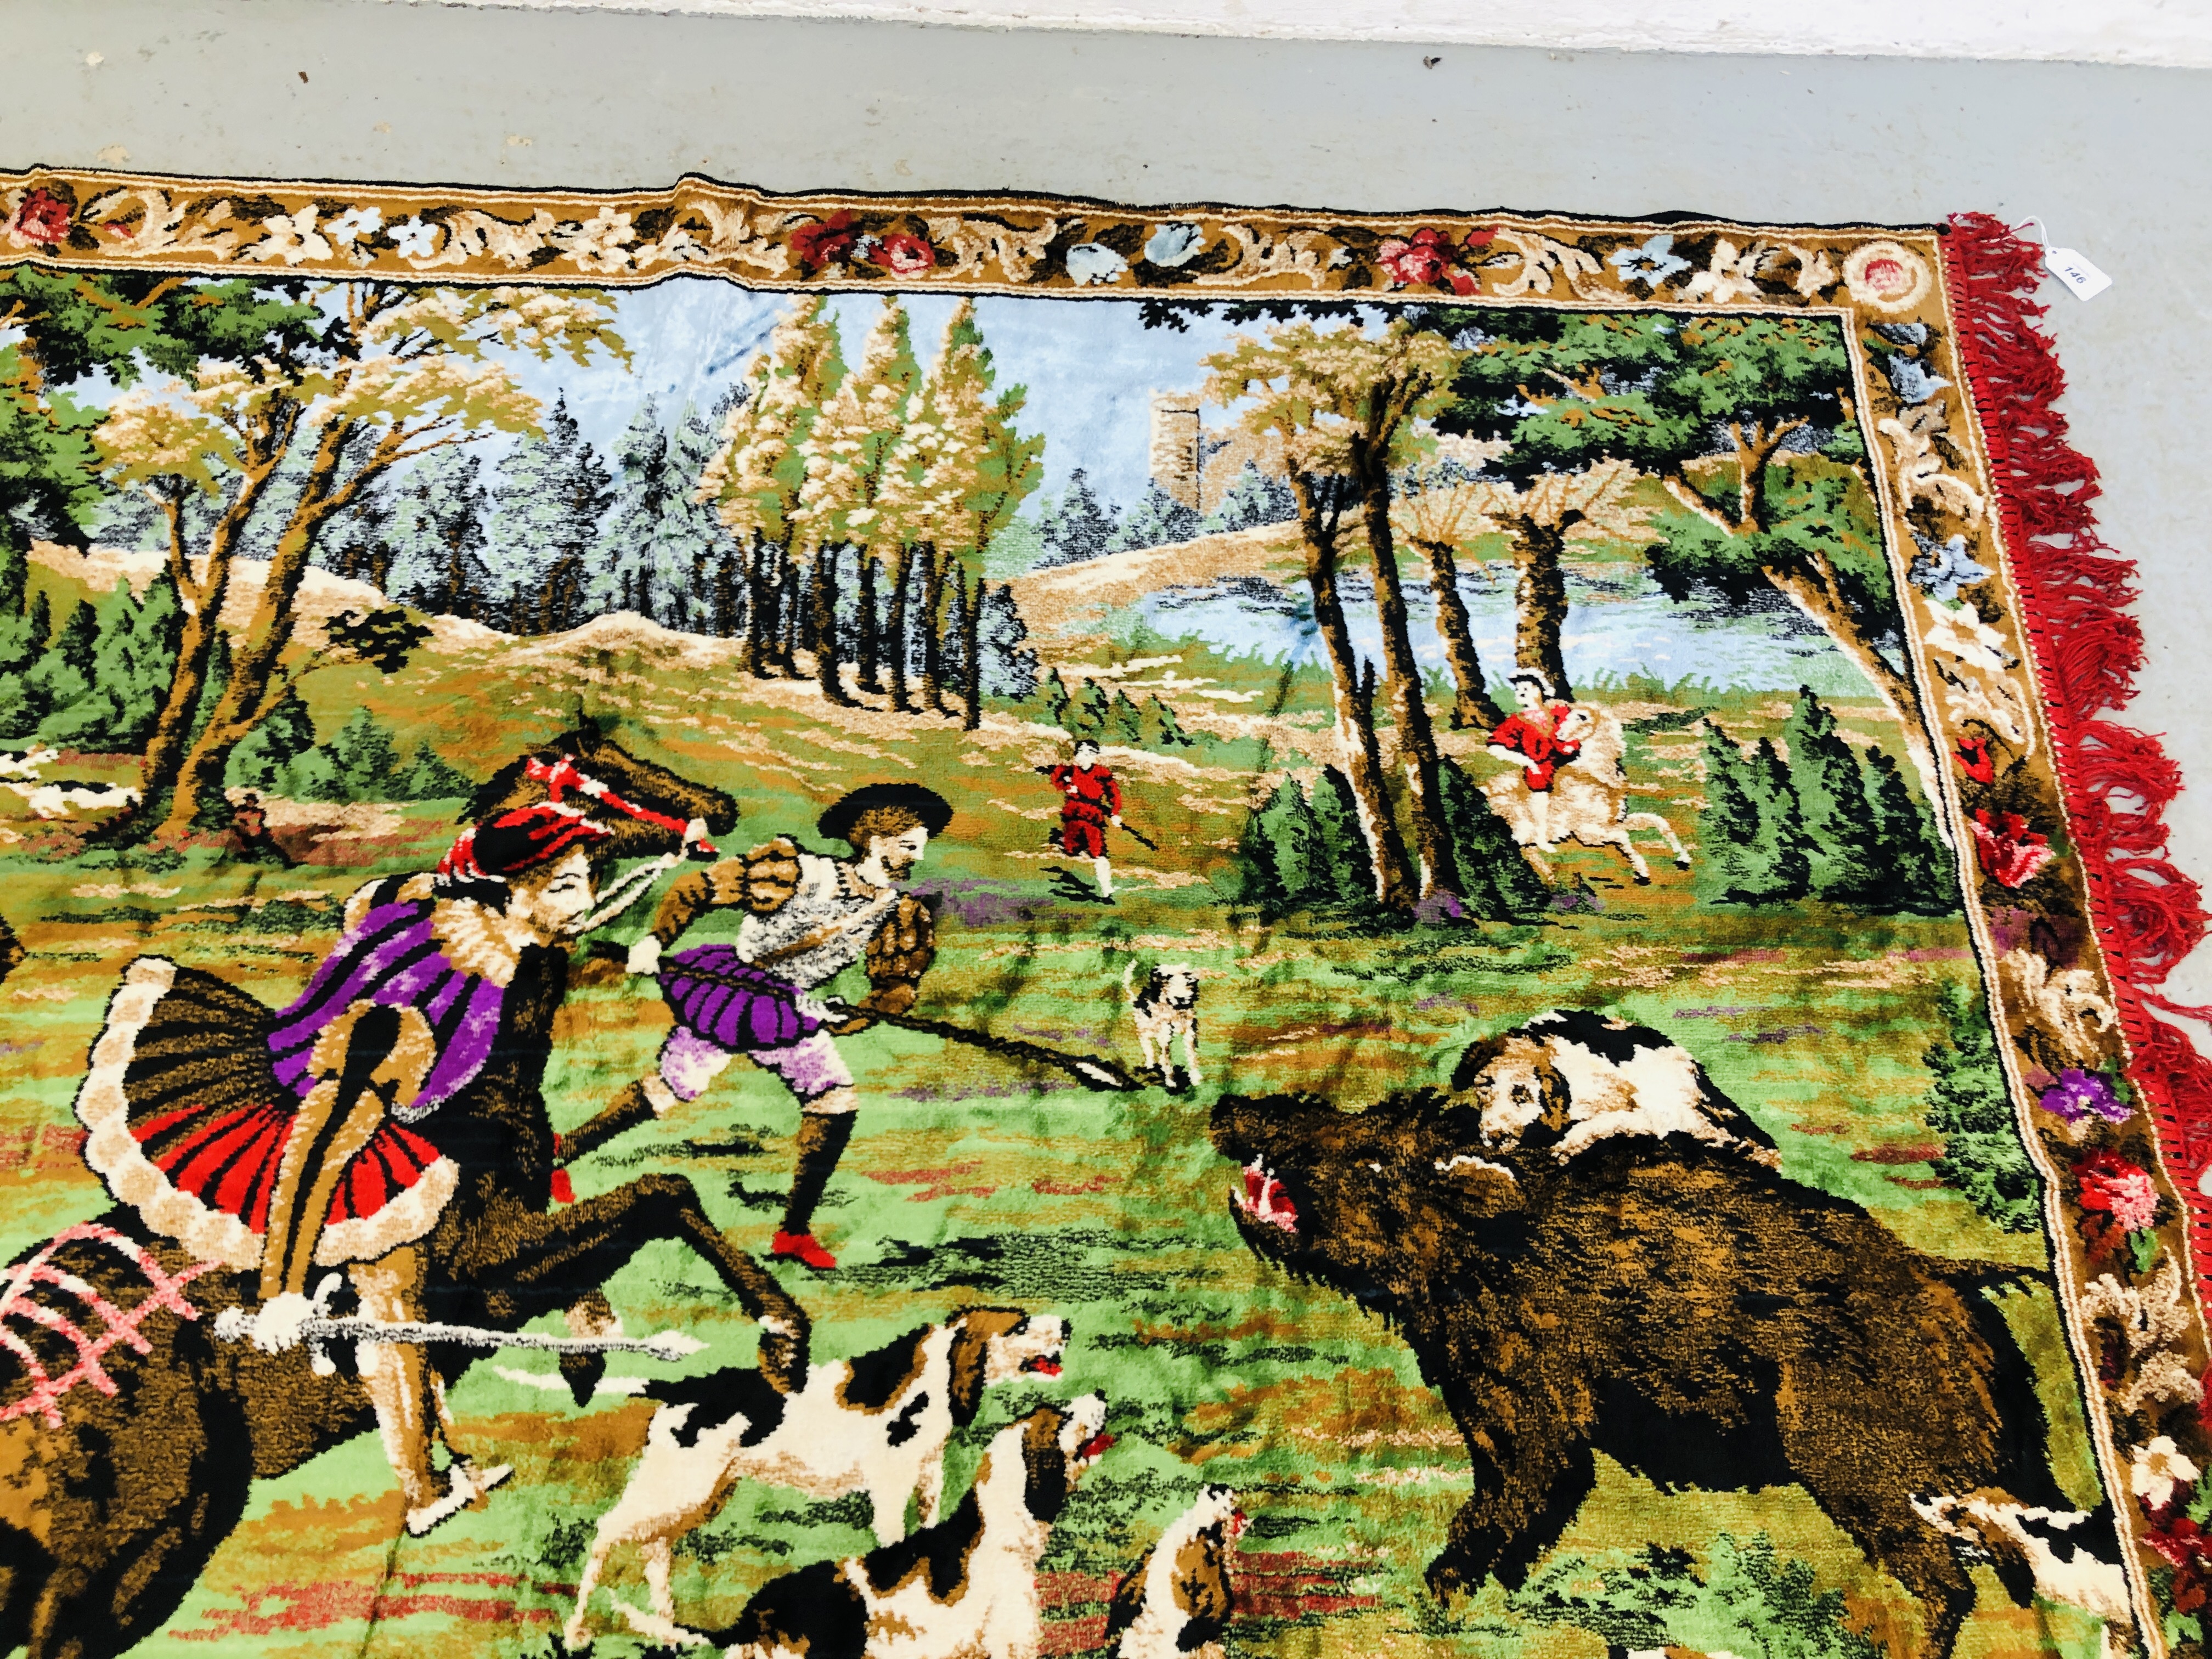 LARGE WALL HANGING DEPICTING A HUNTING SCENE WIDTH 174CM. HEIGHT 117CM. - Image 4 of 6